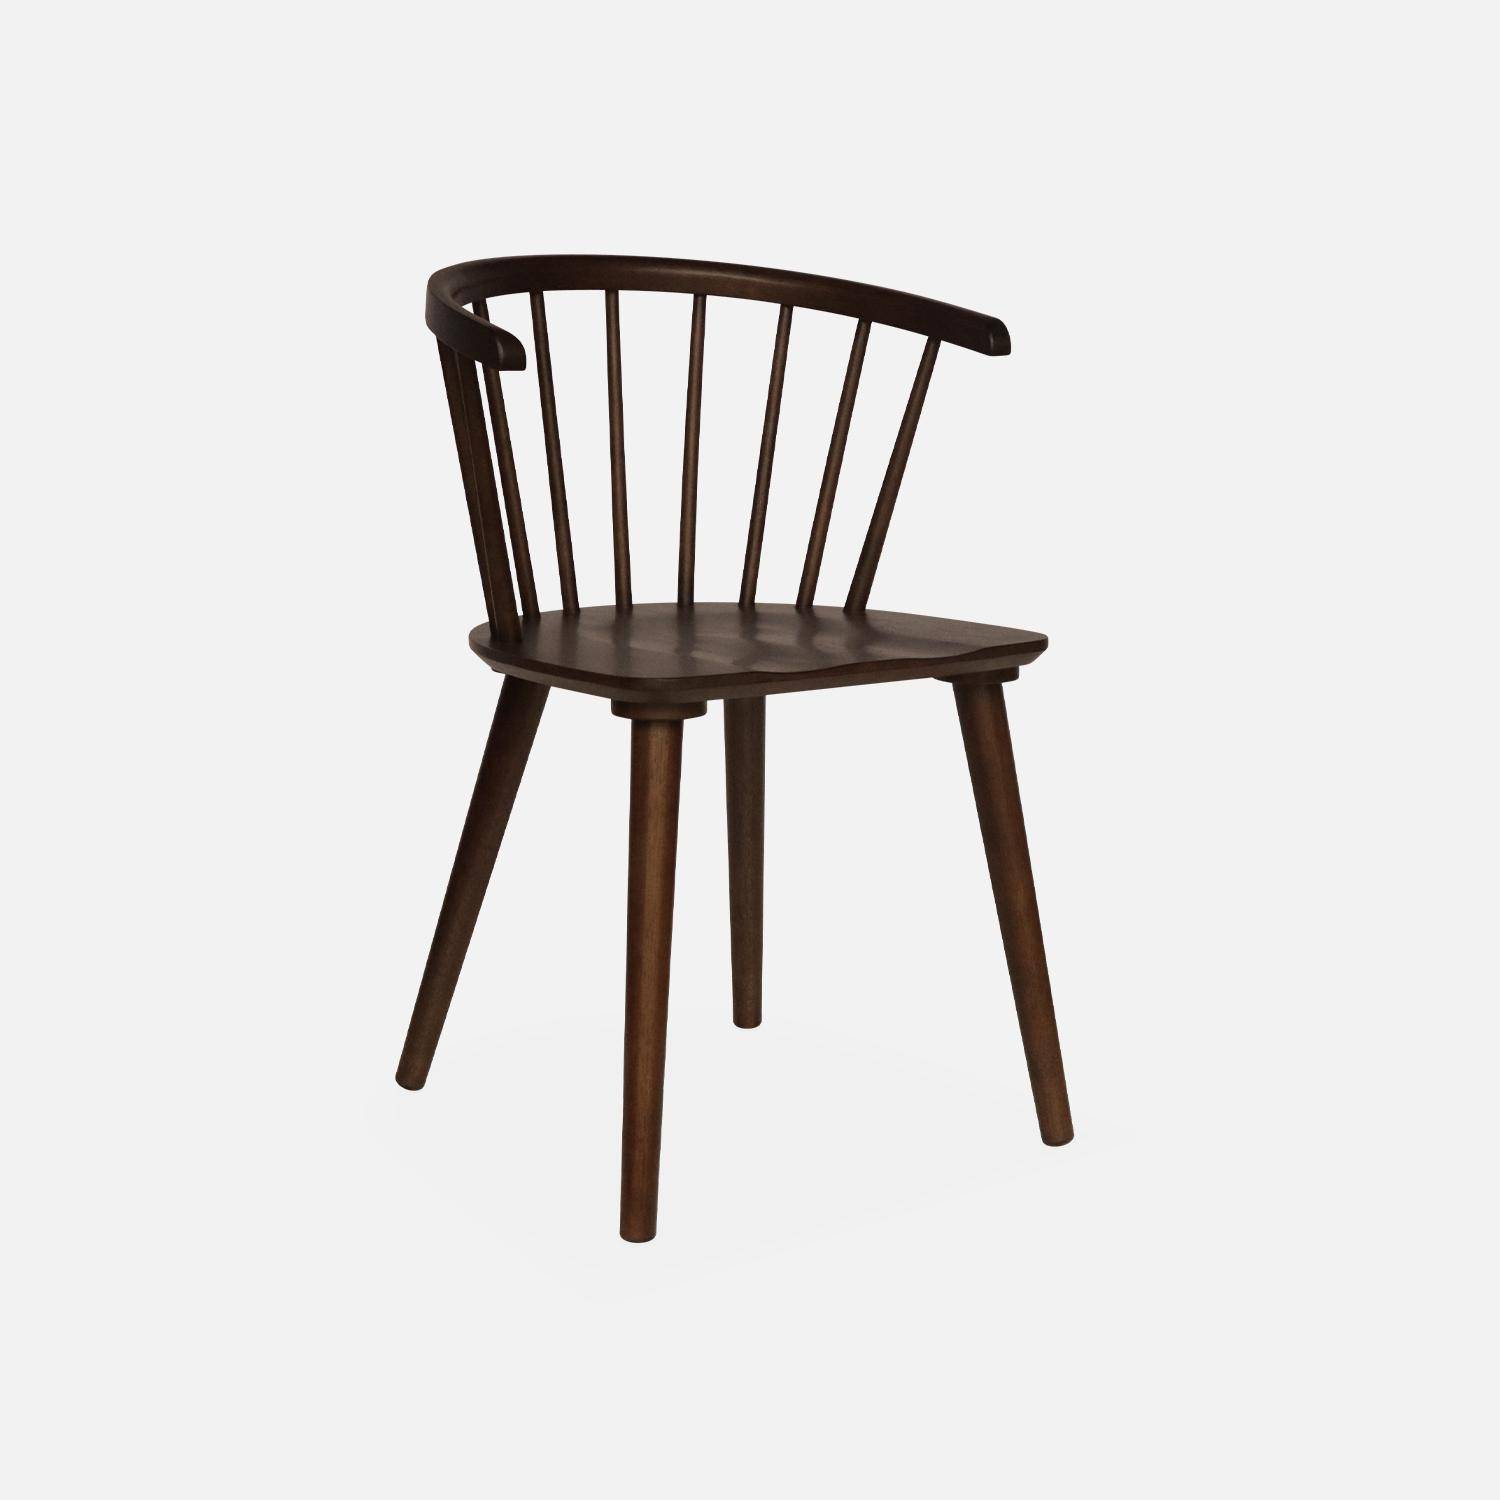 Pair of Wood and Plywood Spindle Chairs, dark wood, L53 x W47.5 x H76cm,sweeek,Photo4